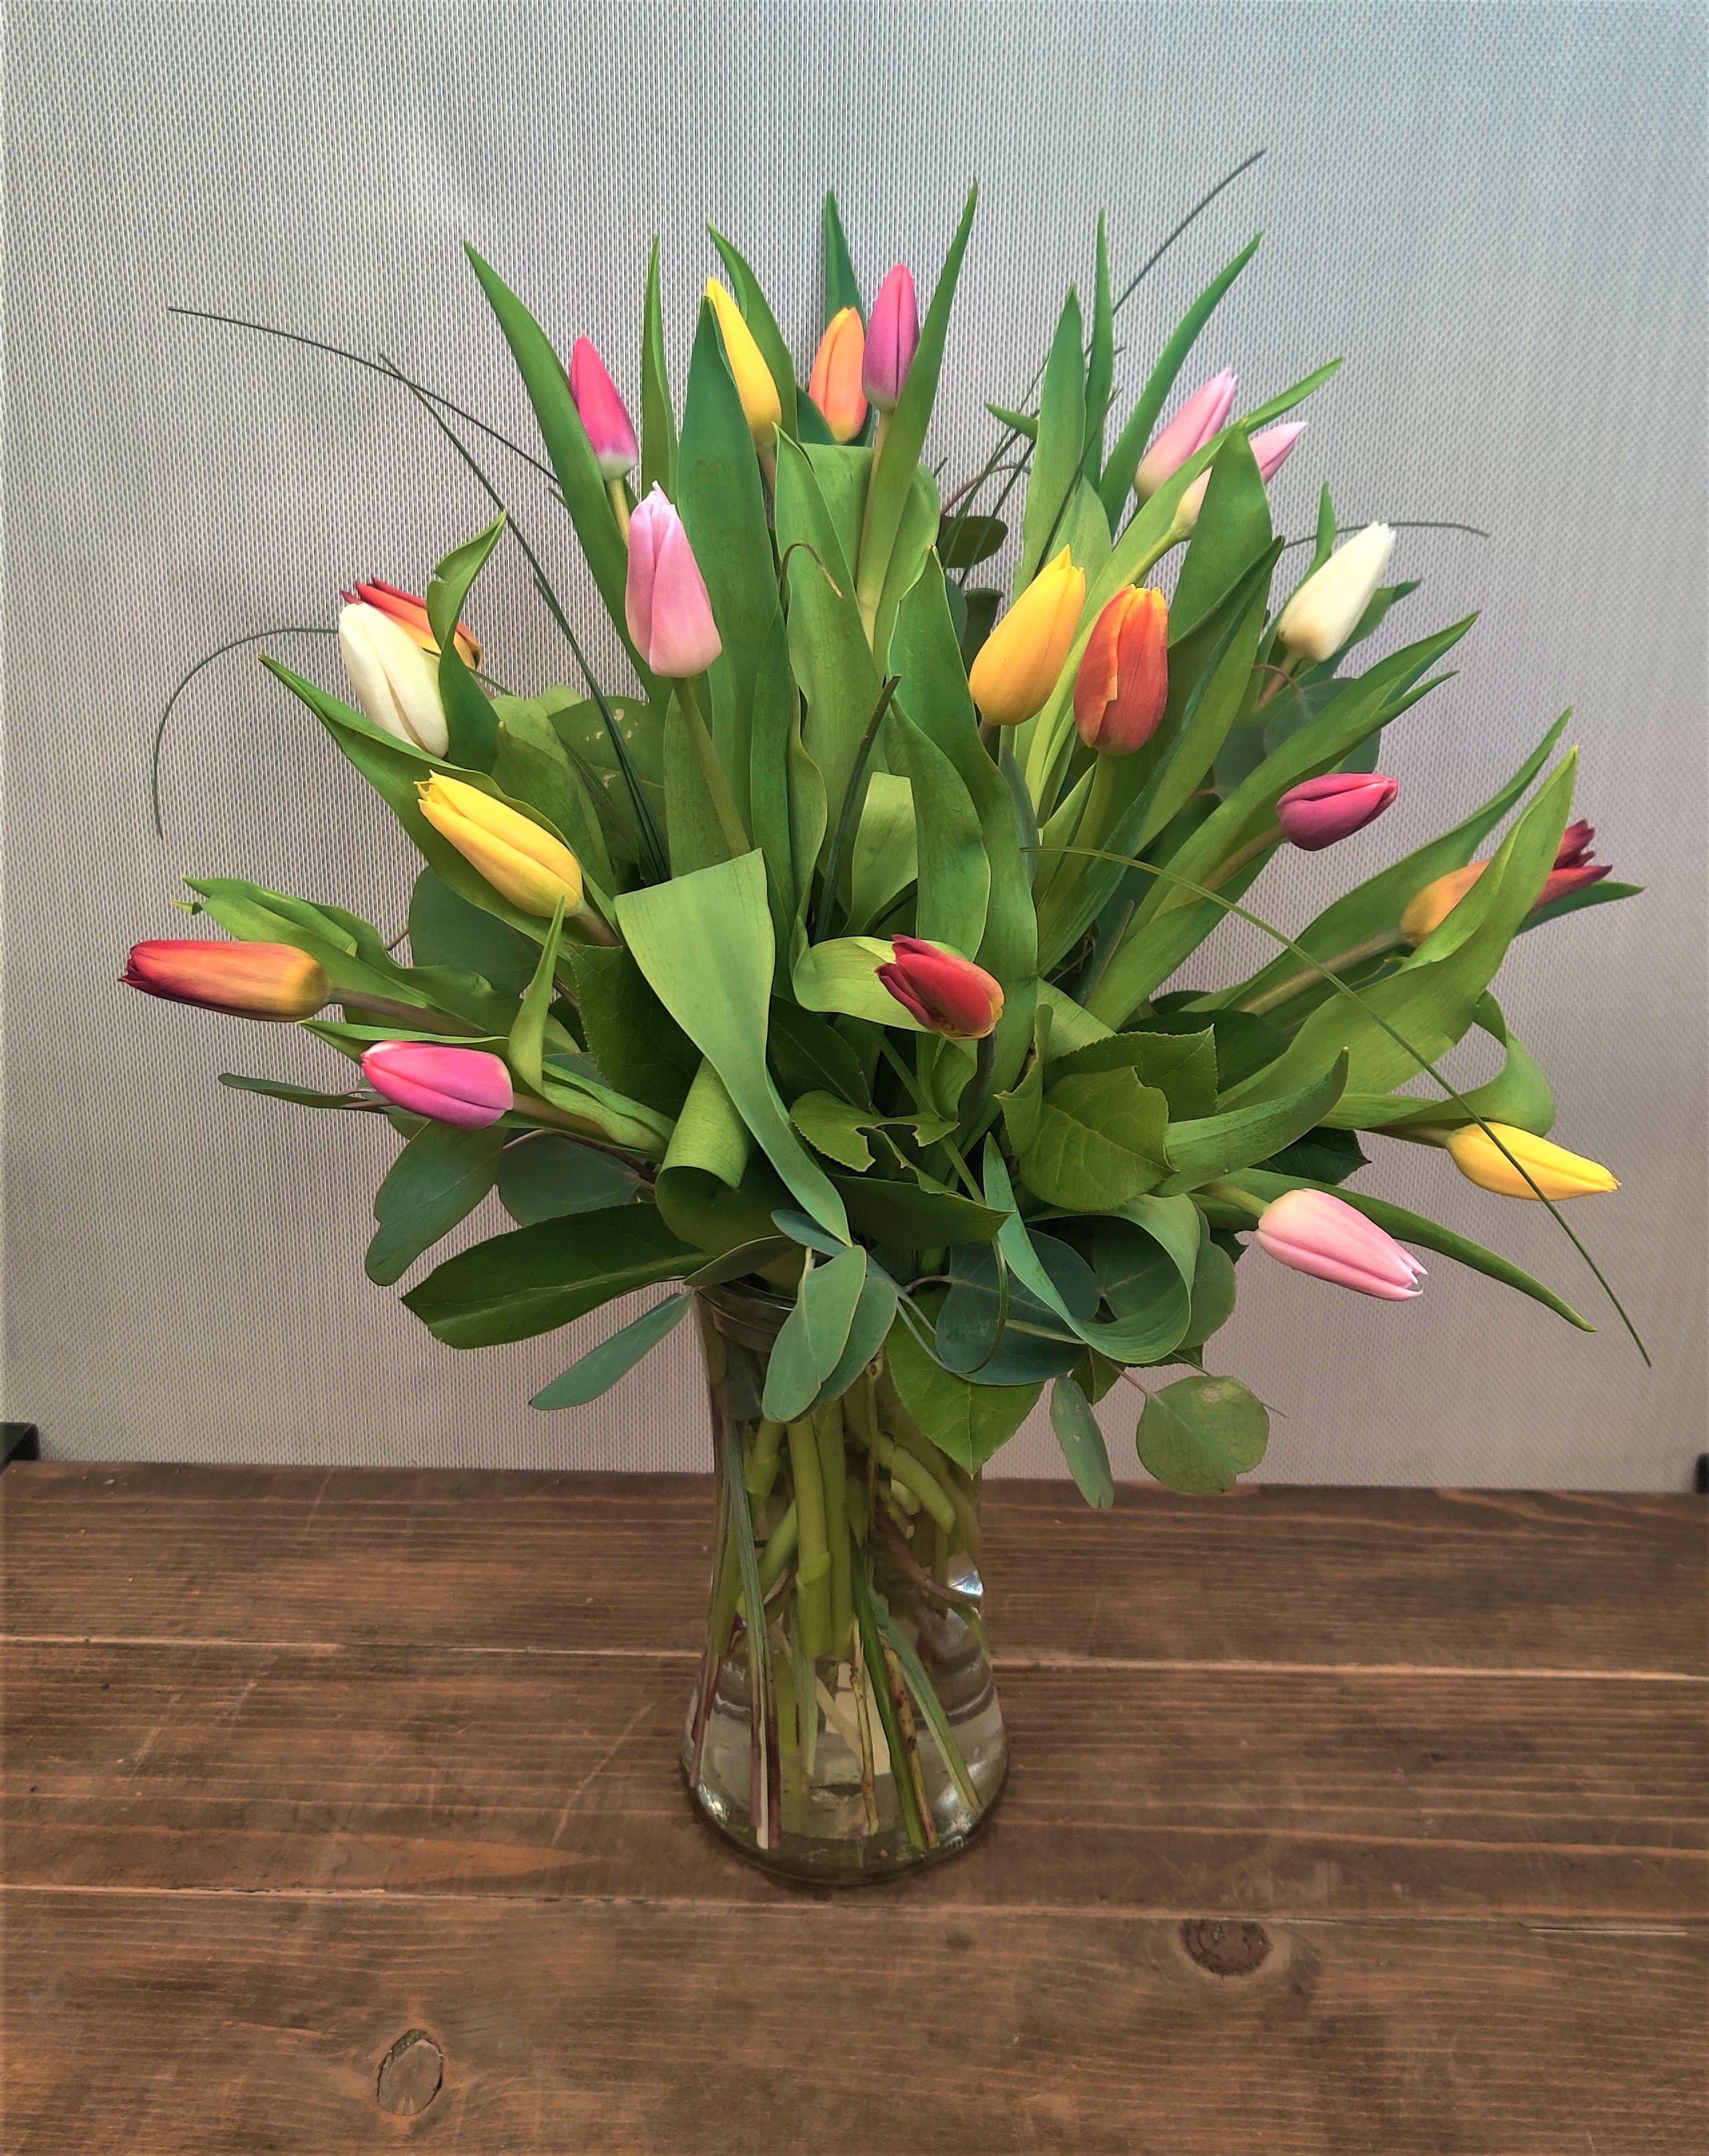 Tenderly Tulips- 20 stems- assorted colors  - Picked fresh from the farm, this tulip Bouquet is a jubilant expression of the changing seasons! Celebrate the day with our finest tulips in a bright assortment of colors, seated in a clear glass vase creating a dazzling bouquet that showers them with your affection. 